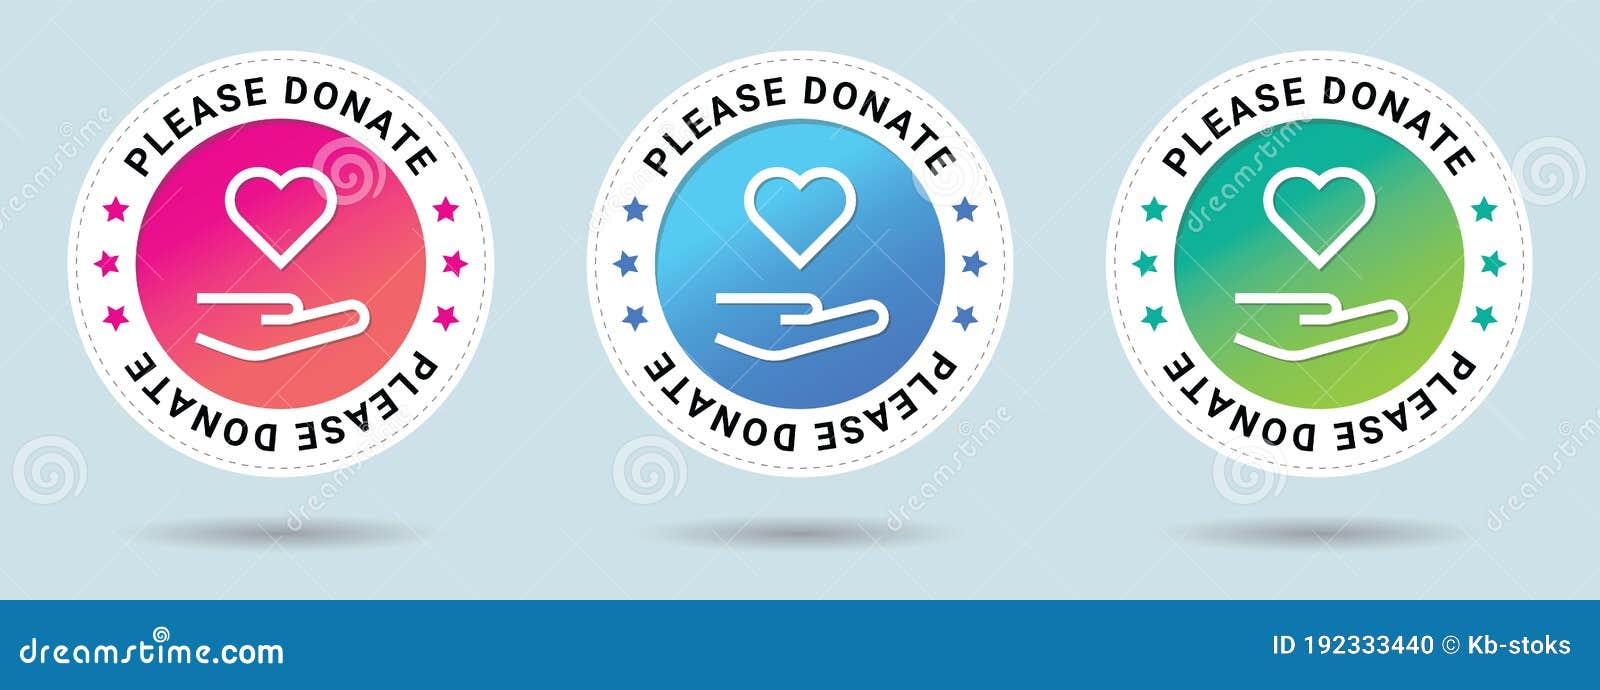 Please Donate Stamp Vector Illustration. Stock Vector